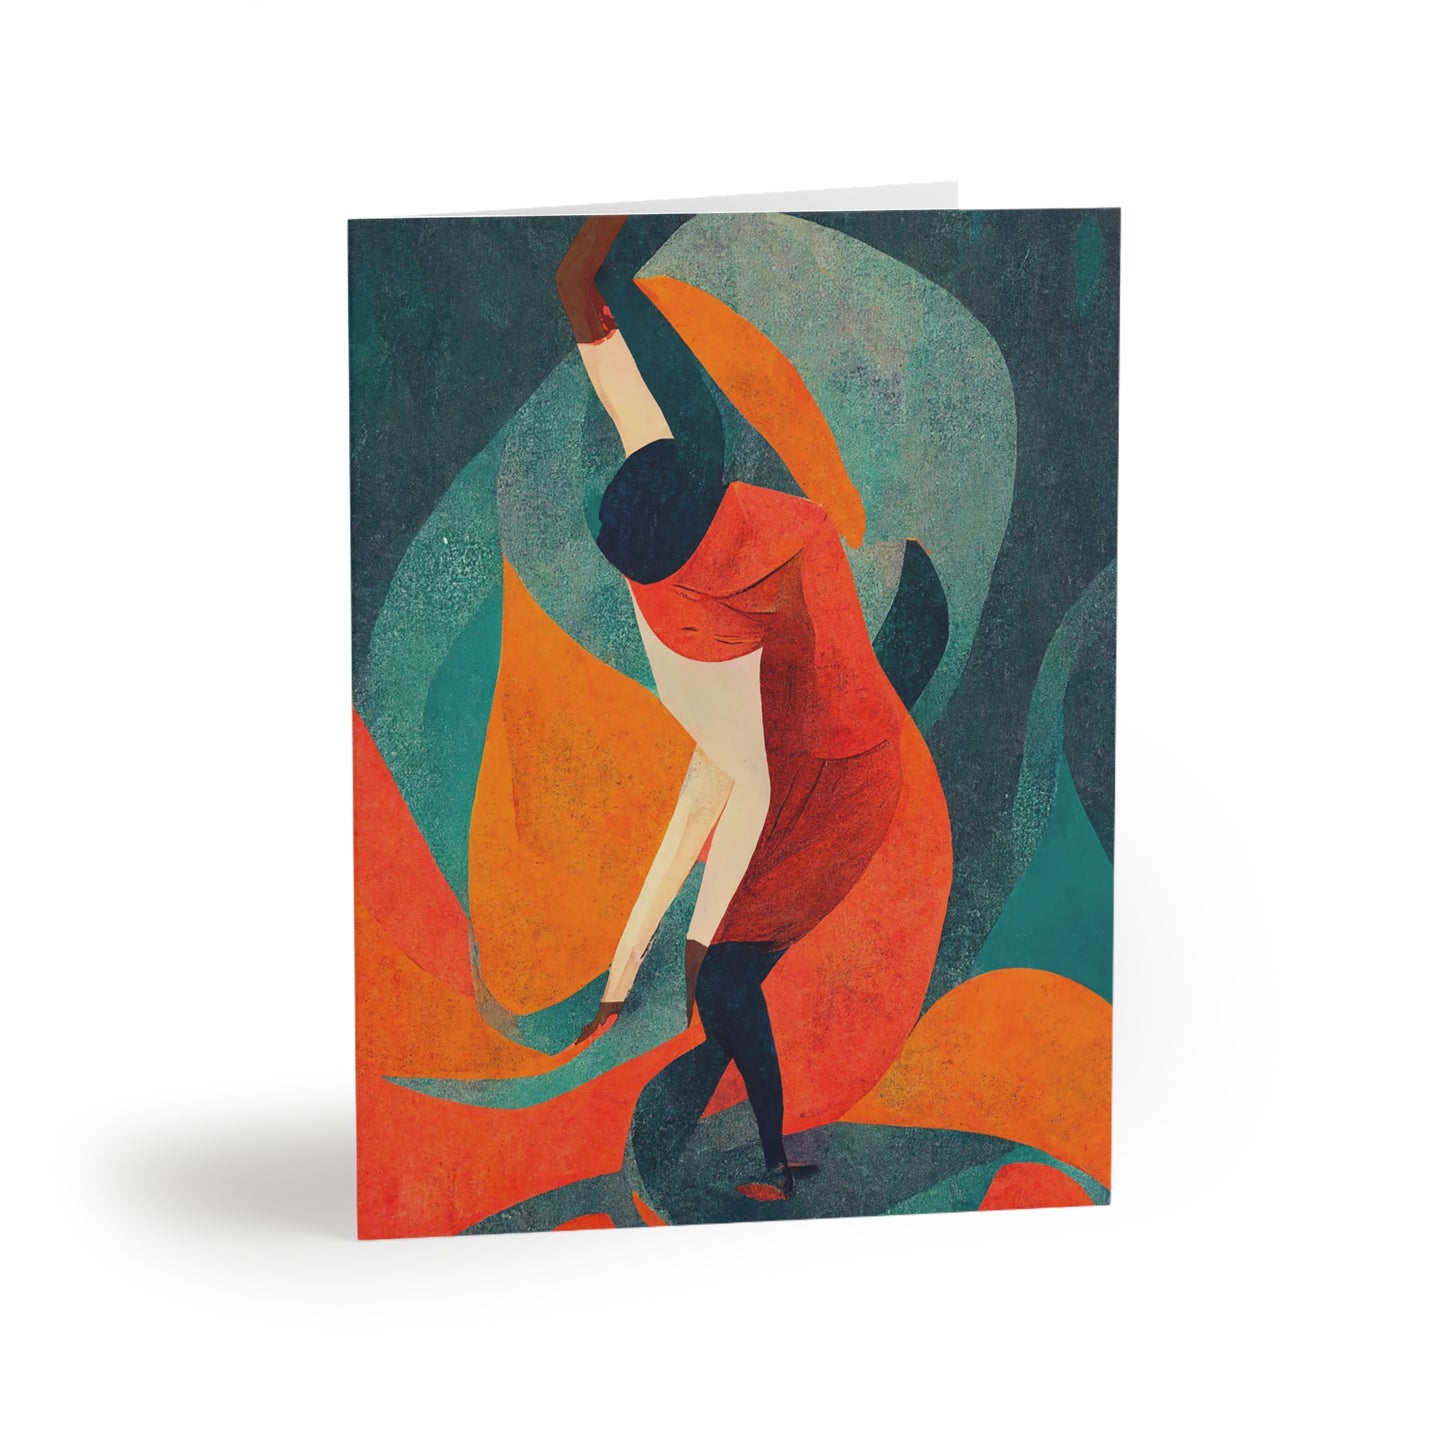 "Dance it out" Greeting cards (8, 16, and 24 pcs)